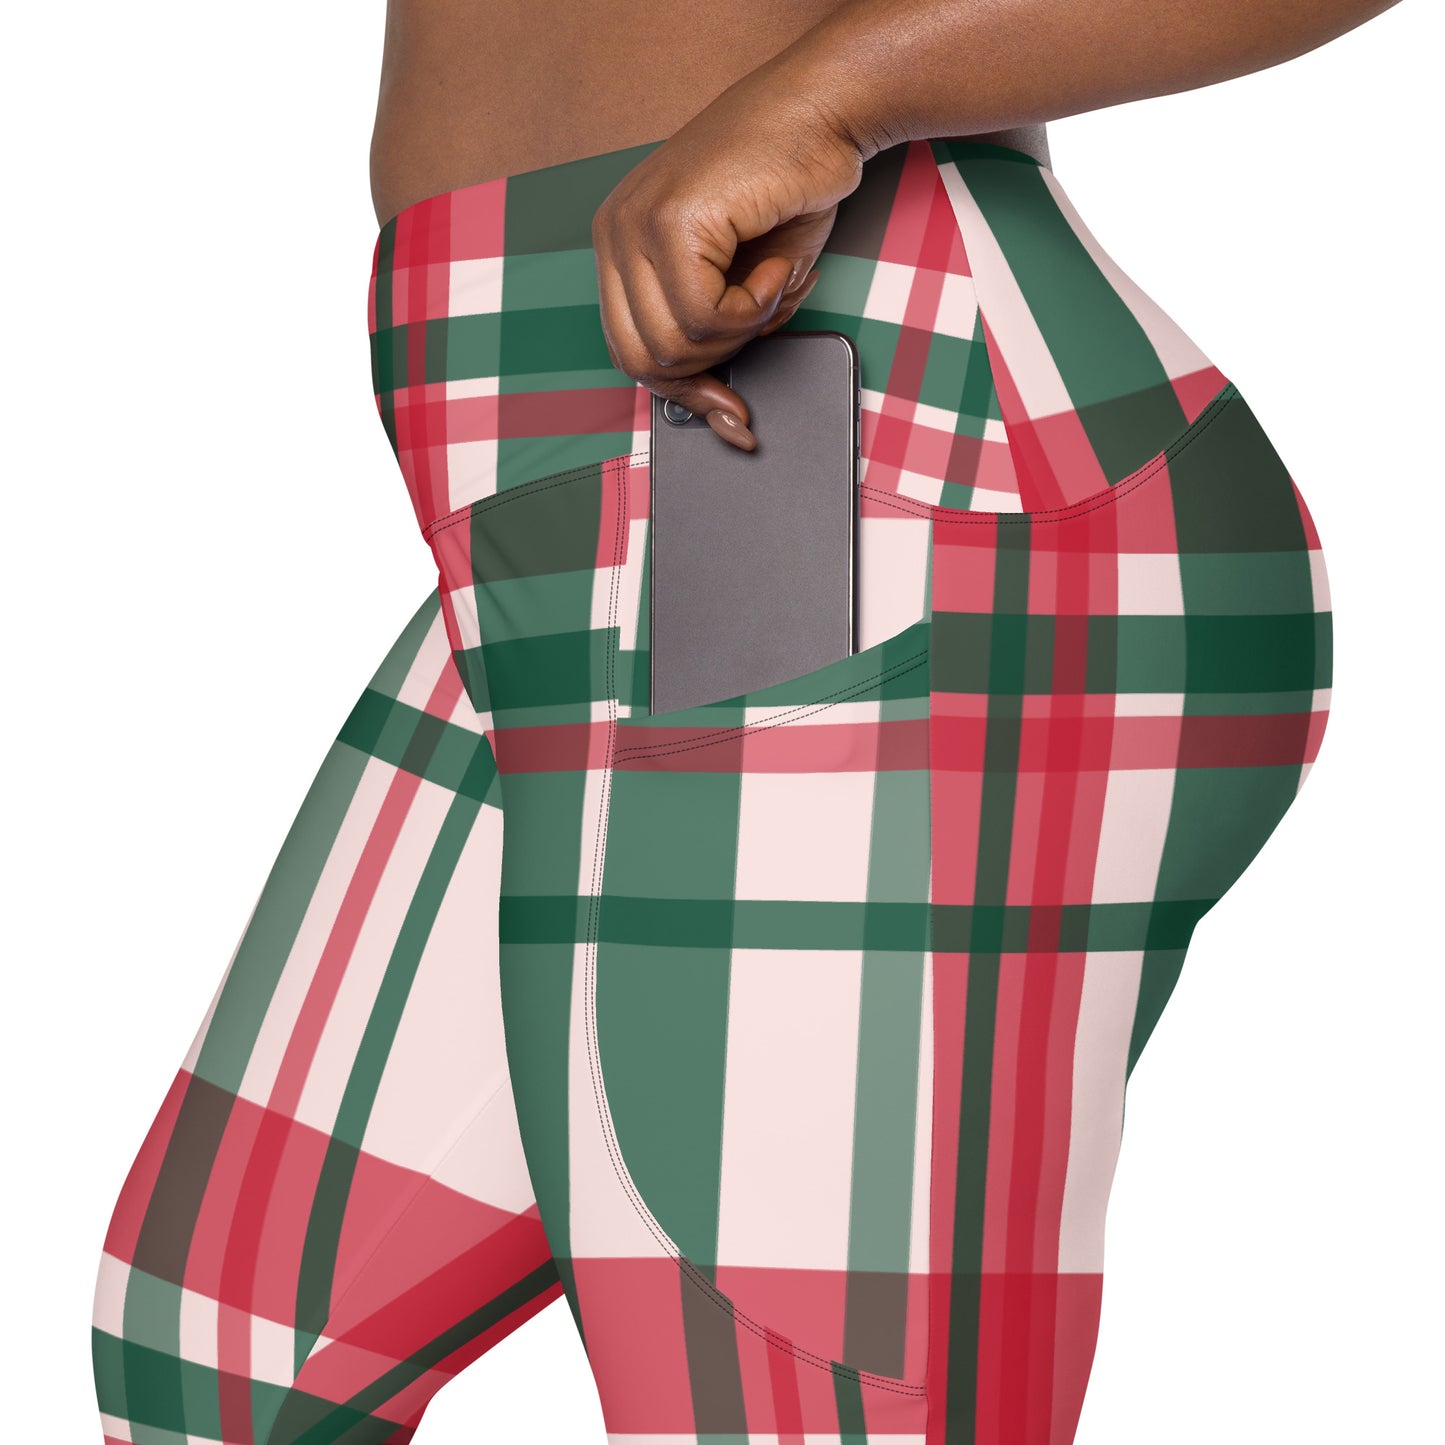 Peach Plaid Crossover leggings with pockets